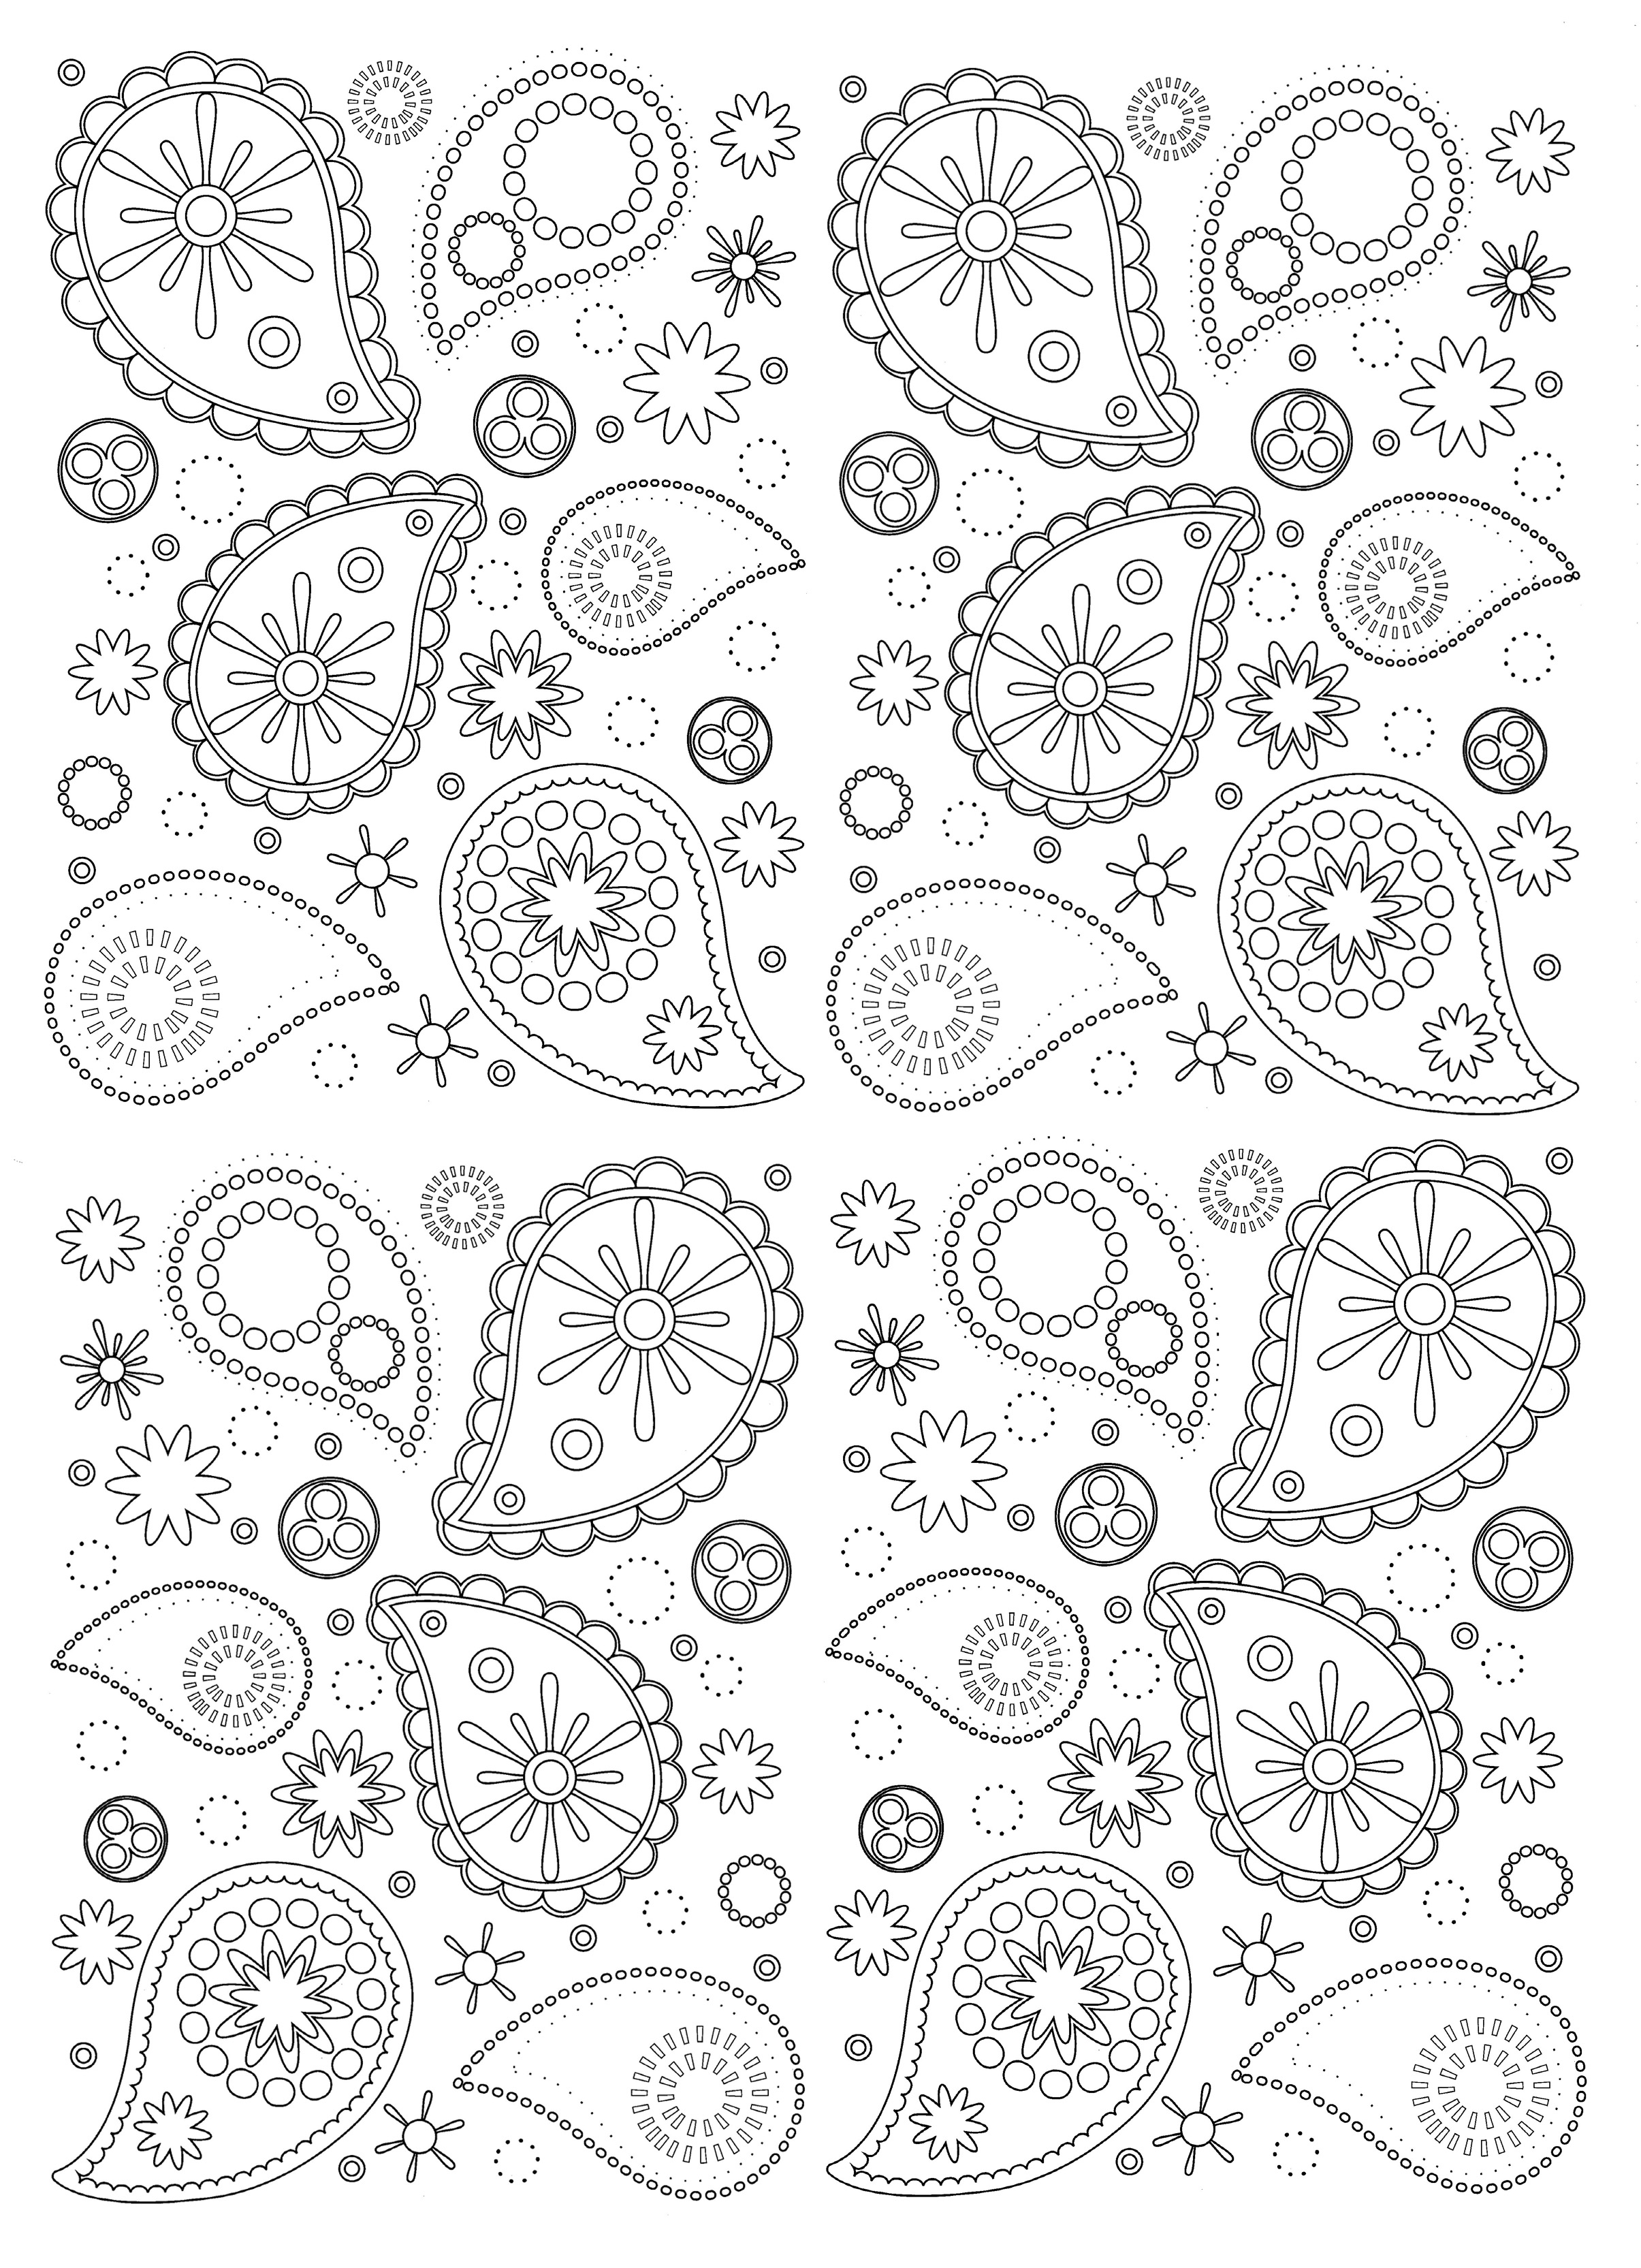 Paisley Coloring Pages For Adults Advanced Coloring Pages